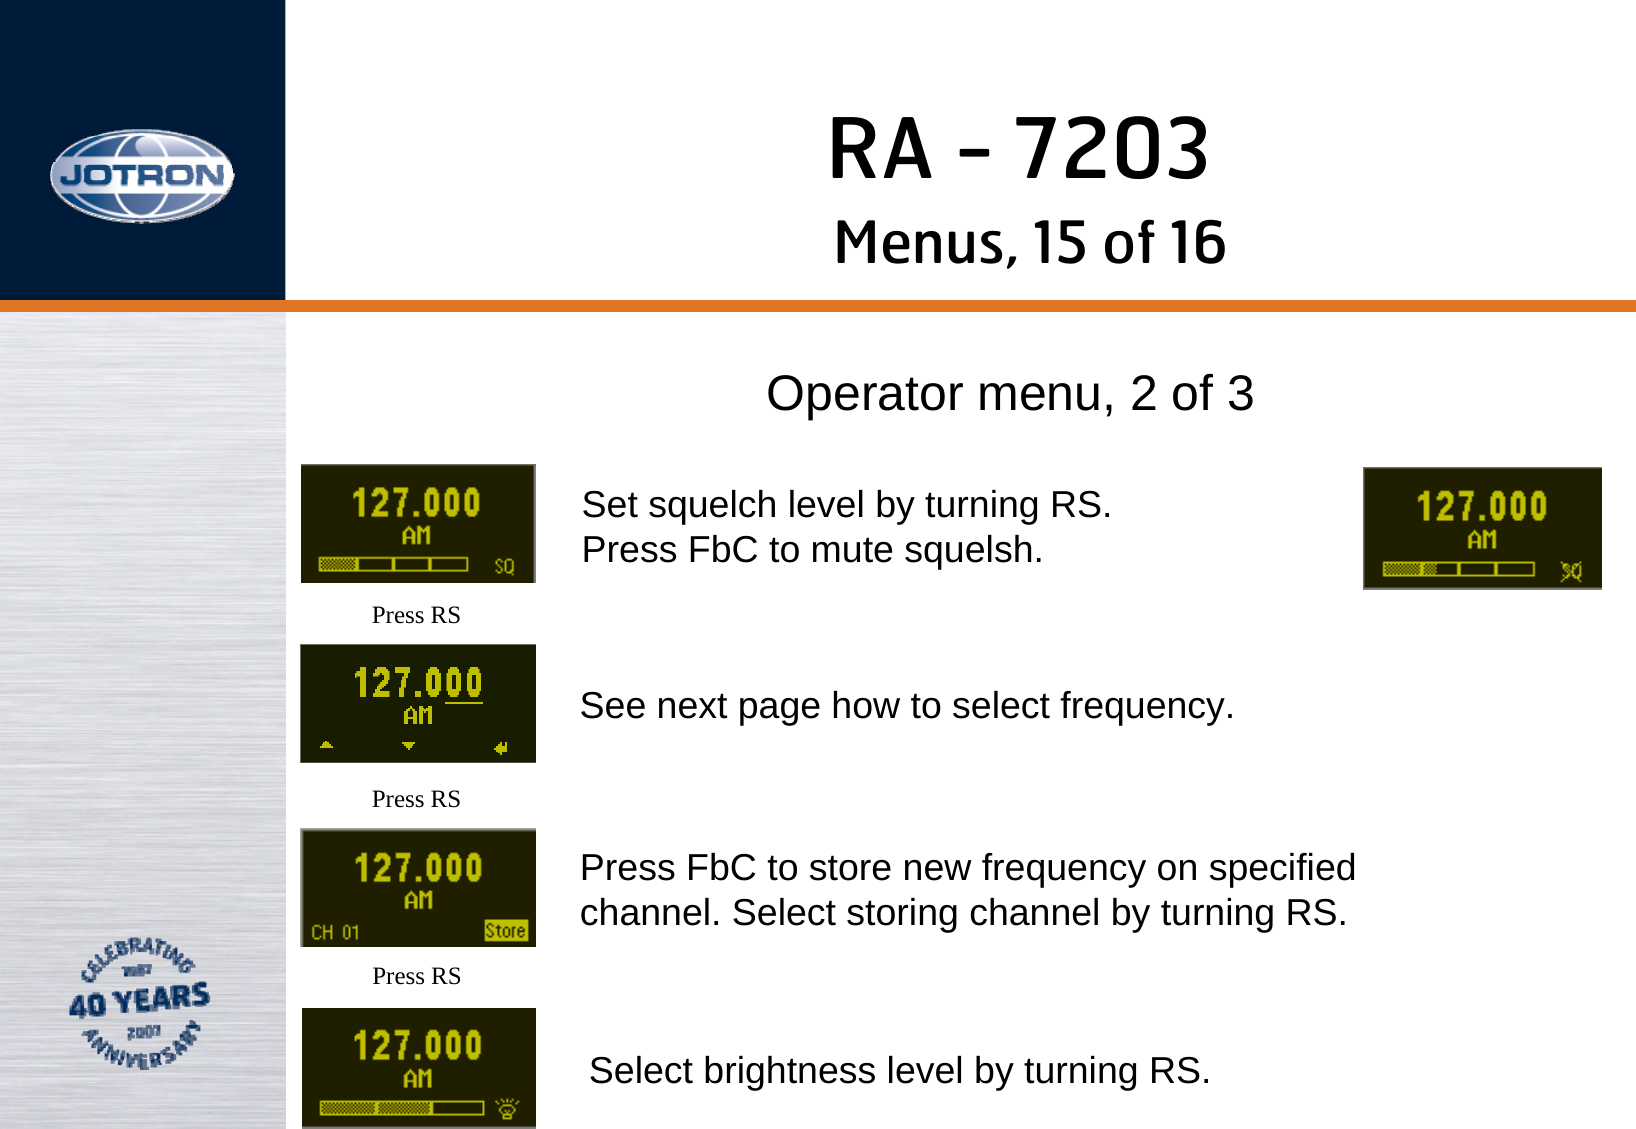 RA - 7203Menus, 15 of 16Operator menu, 2 of 3Press RSPress RSPress RSSet squelch level by turning RS. Press FbC to mute squelsh.See next page how to select frequency.Press FbC to store new frequency on specified channel. Select storing channel by turning RS.Select brightness level by turning RS.